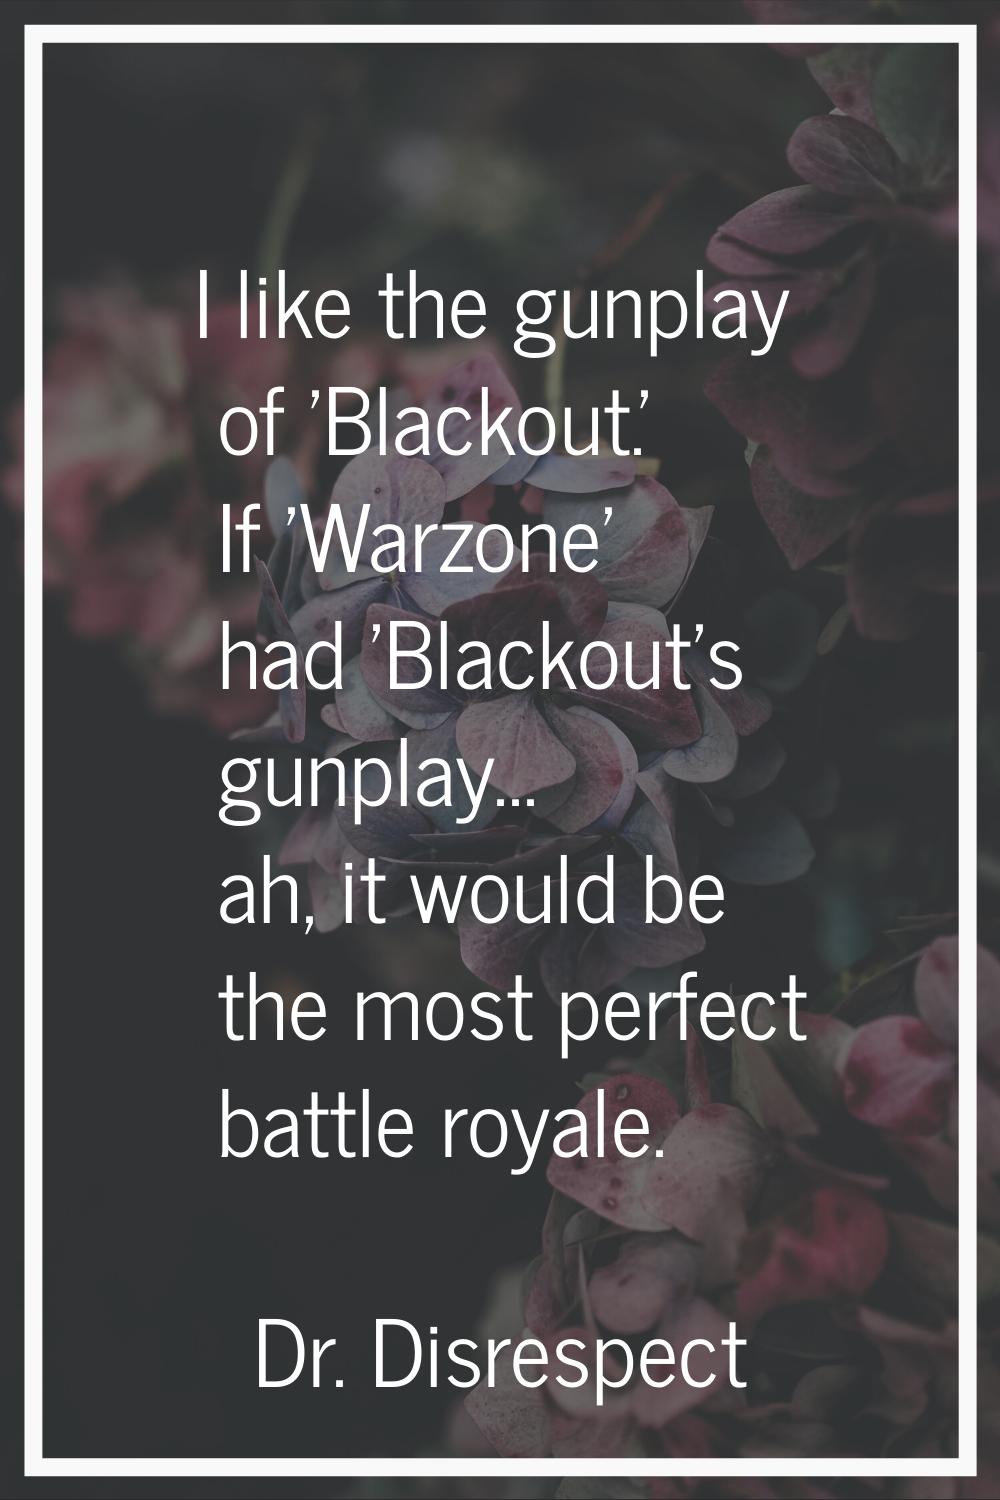 I like the gunplay of 'Blackout.' If 'Warzone' had 'Blackout's gunplay... ah, it would be the most 